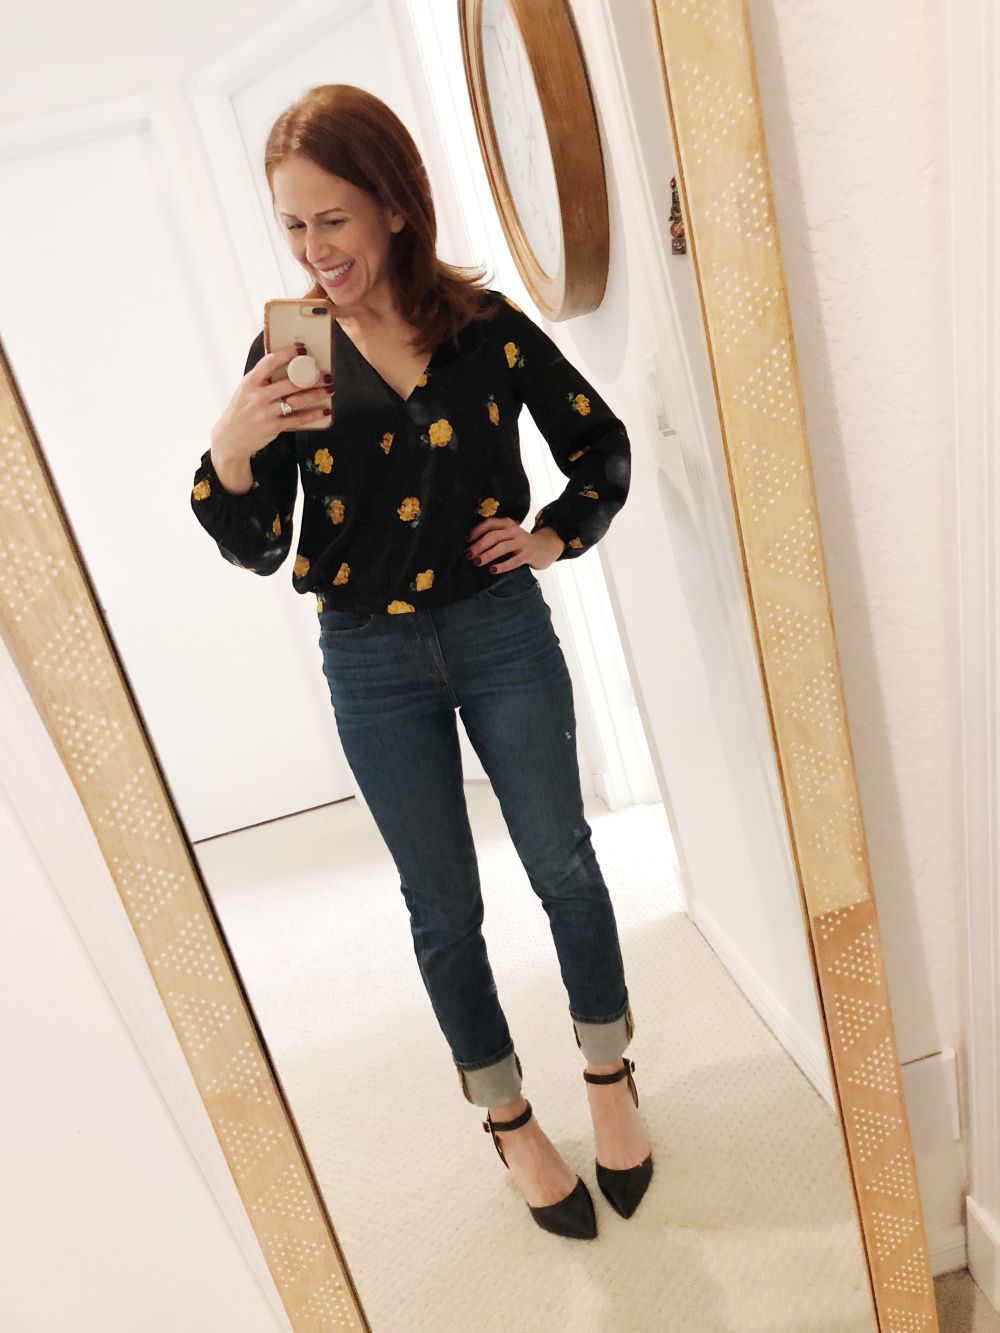 Trunk Club subscription box service -- try-on session #winterstyle #datenightoutfit | Winter Trunk Club Review - Try On Session featured by top Florida fashion blog The Modern Savvy